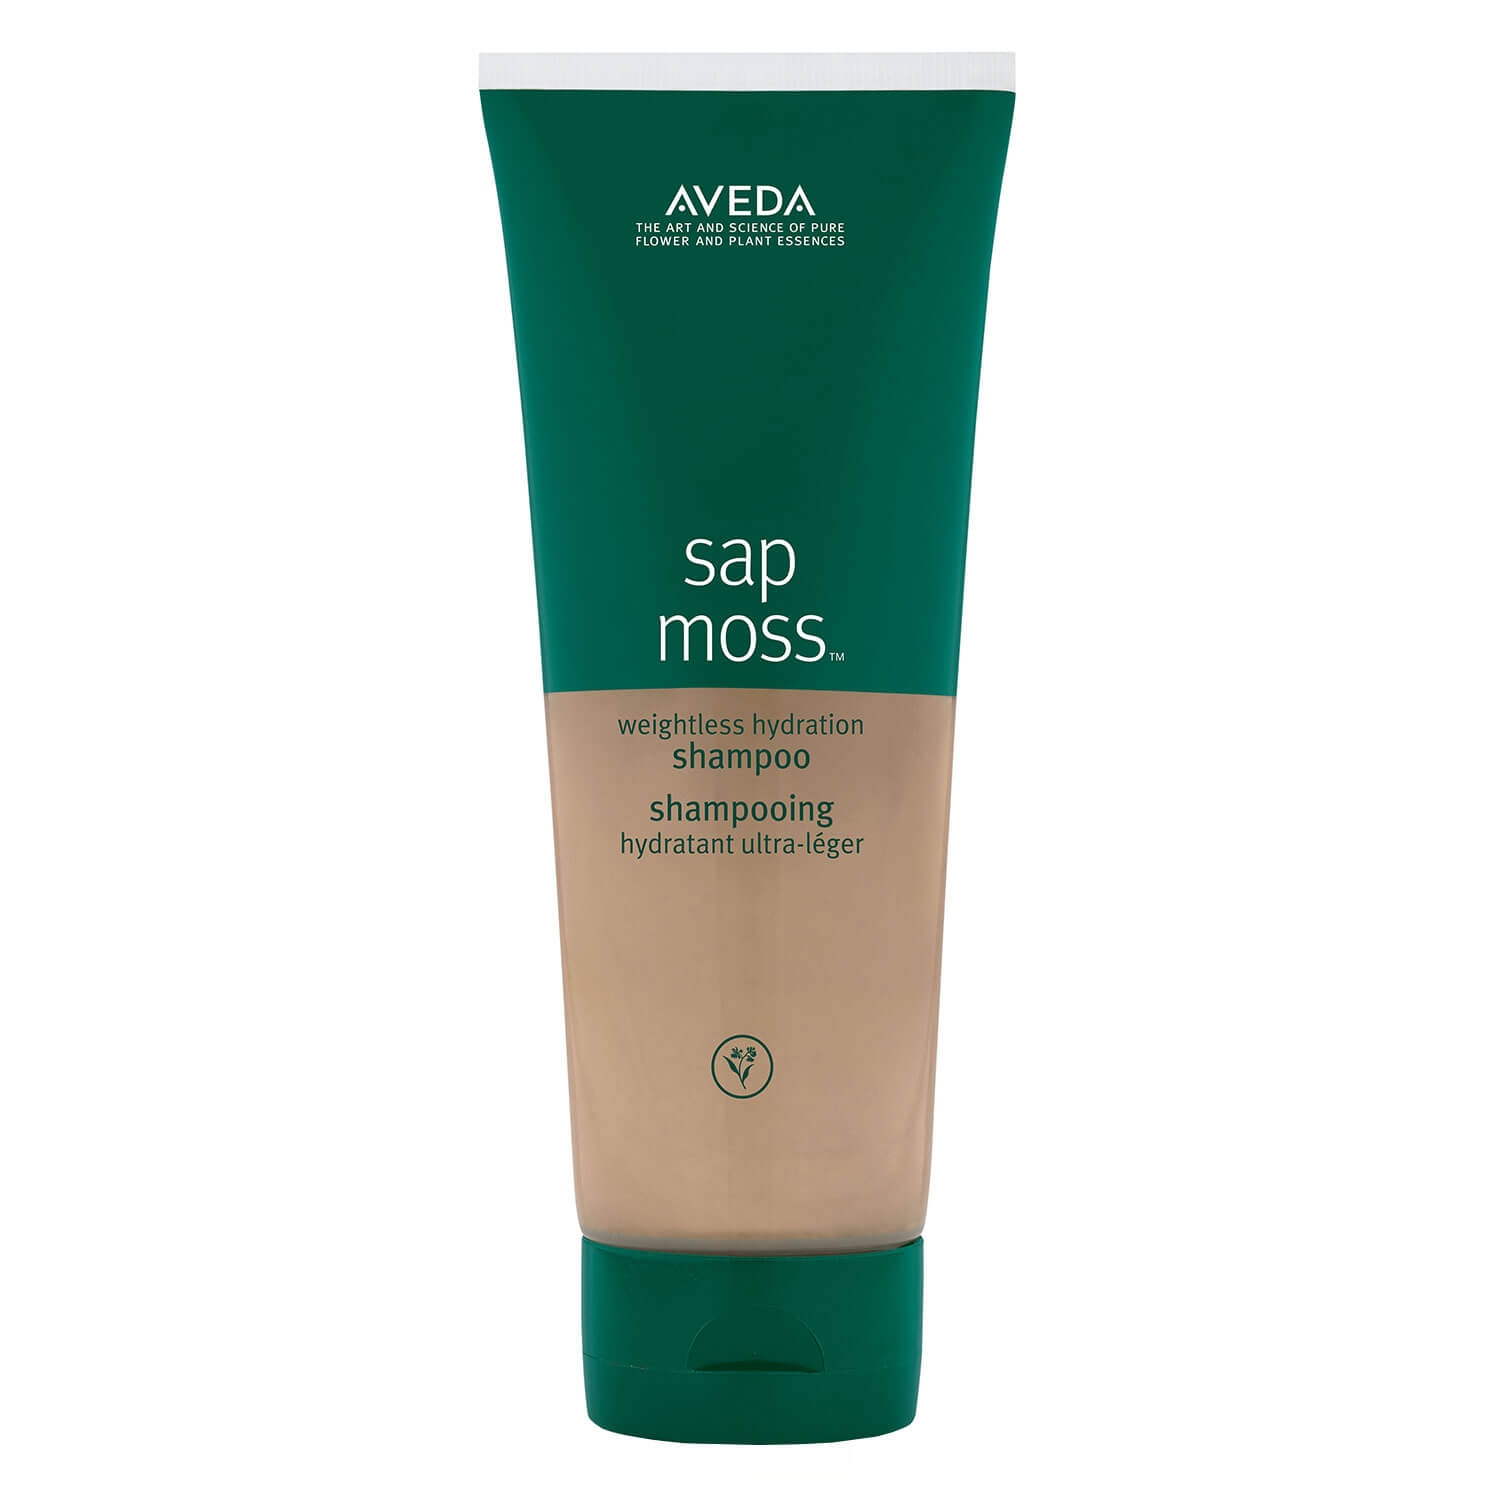 Product image from sap moss - weightless hydration shampoo